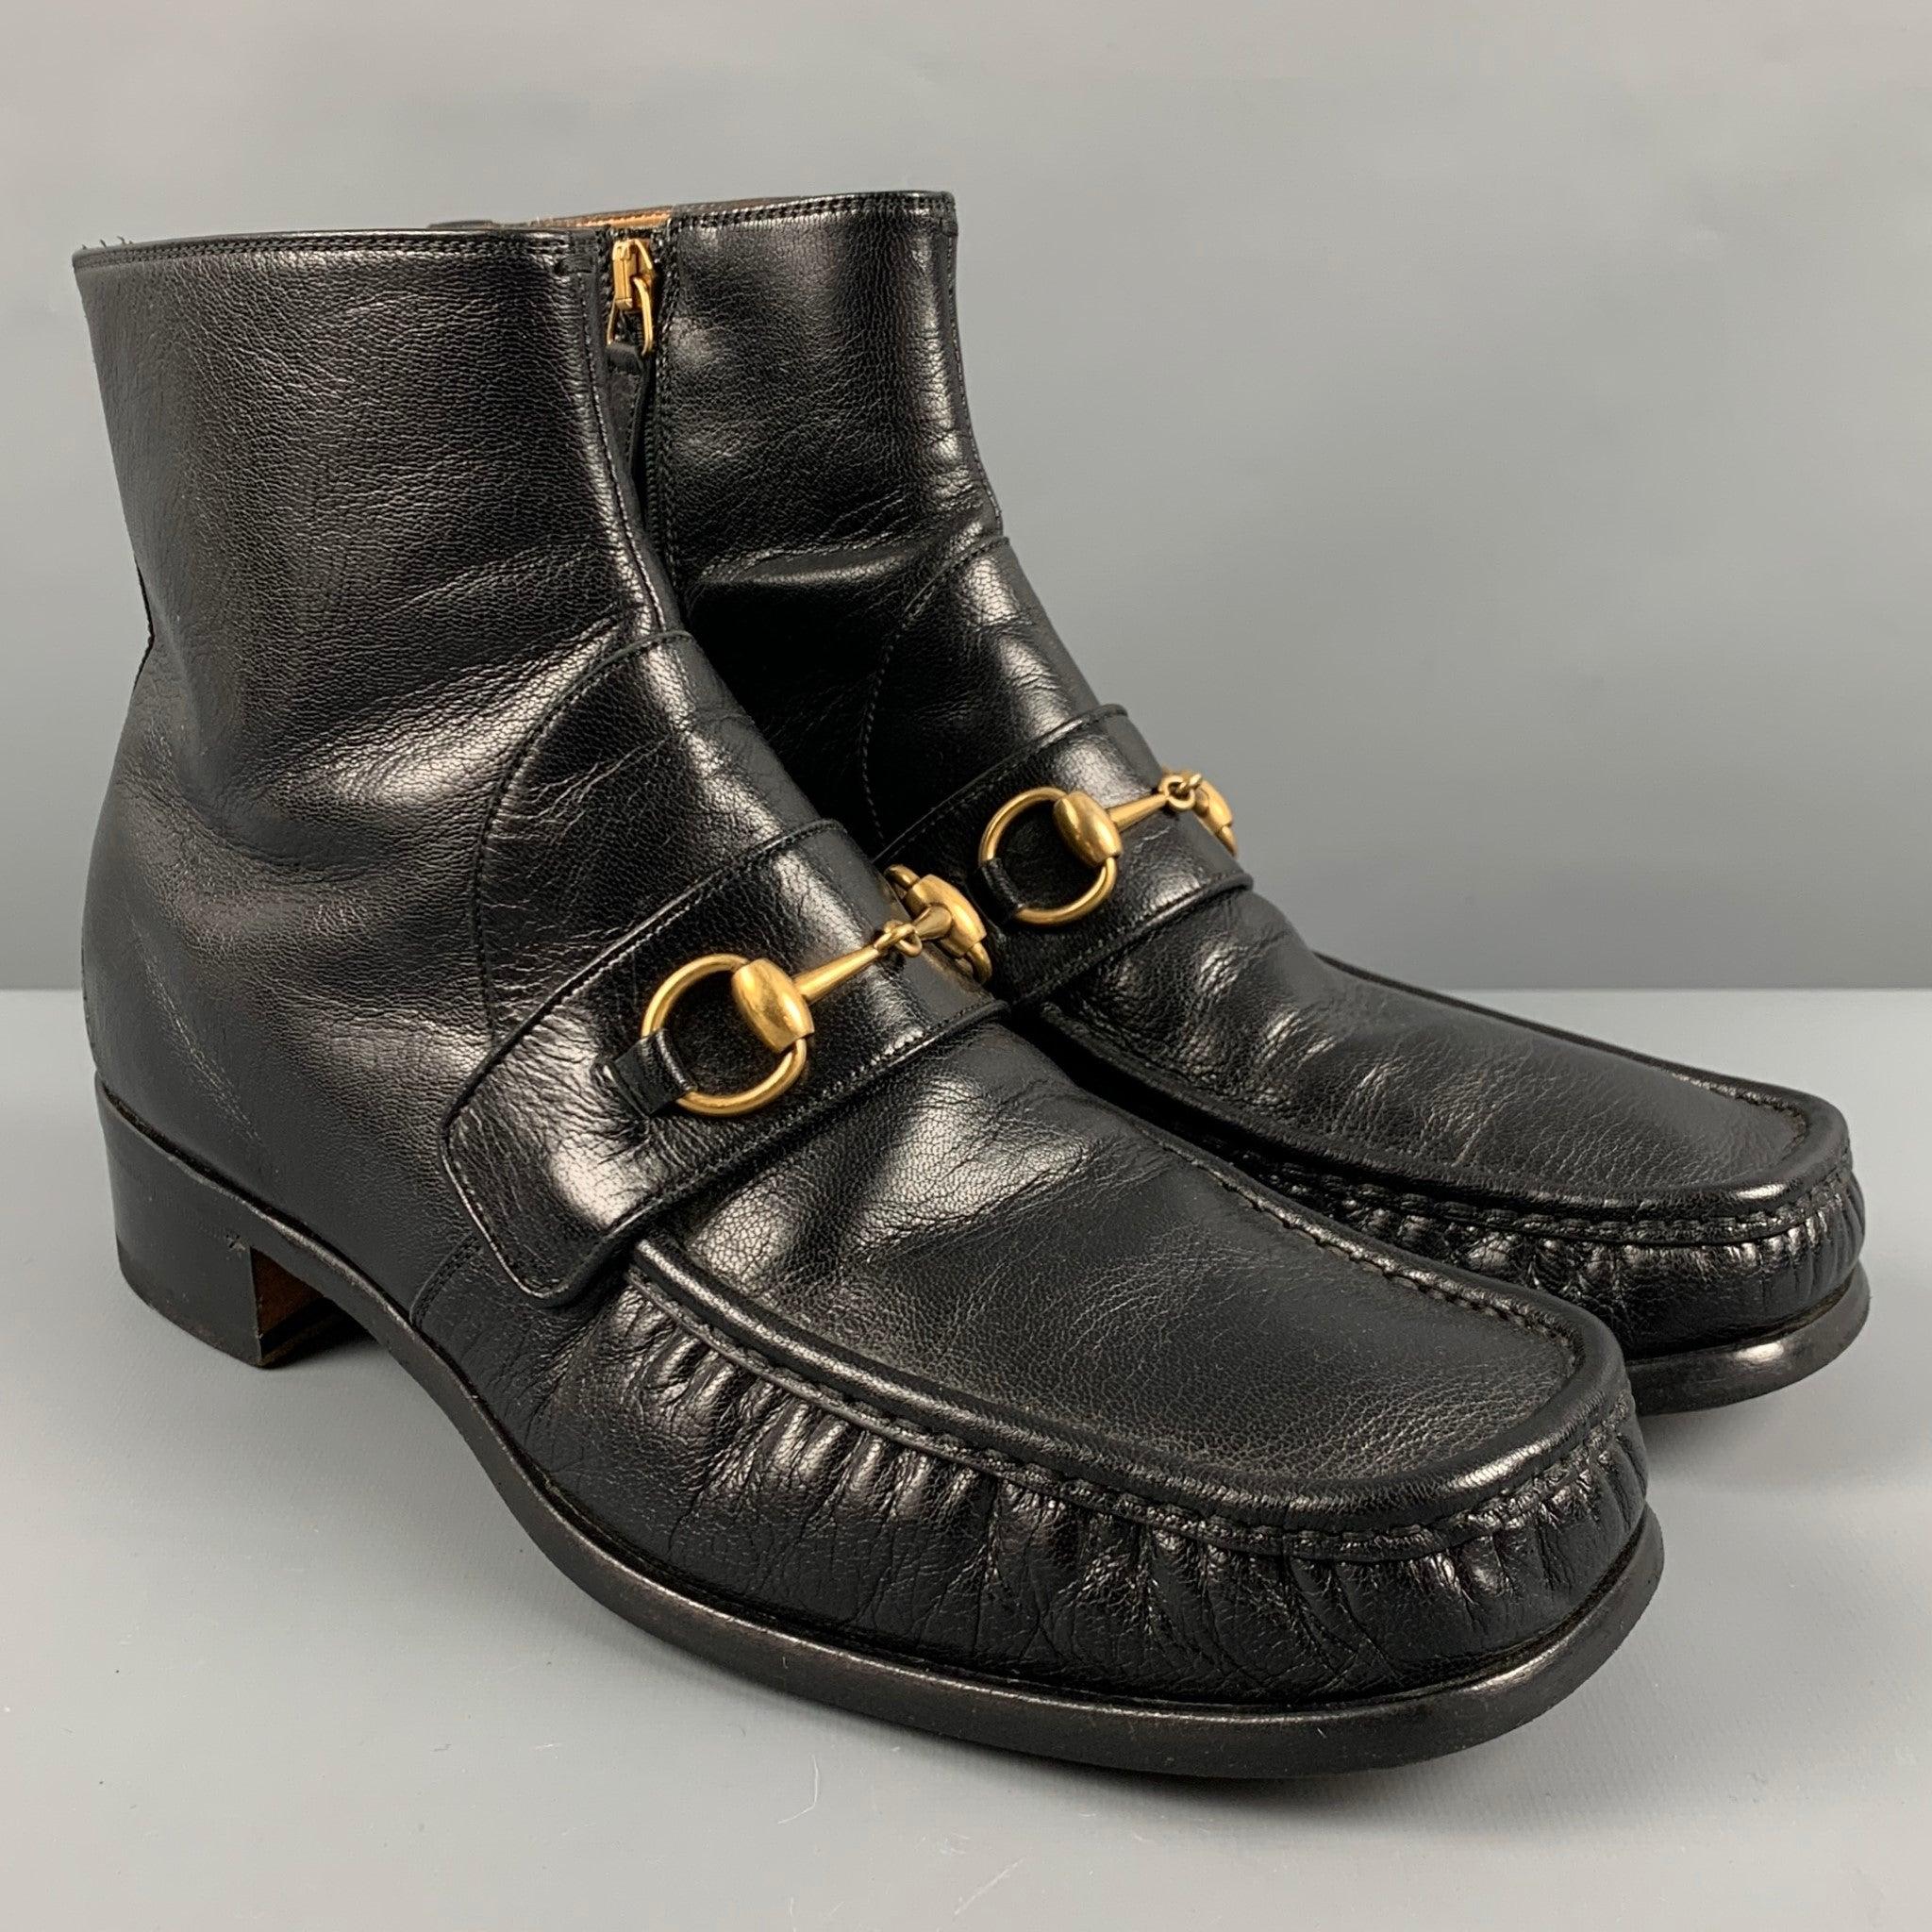 Vegas Apron, Gold tone horse bit
  
  
 
Reference: 127917
Category: Boots
More Details
    
Brand:  GUCCI
Size:  10
Gender:  Male
Color:  Black
Pattern:  Embroidery
Fabric:  Leather
Style:  Square Toe
Style (Boot's):  Ankle
Made in:  Italy
Age